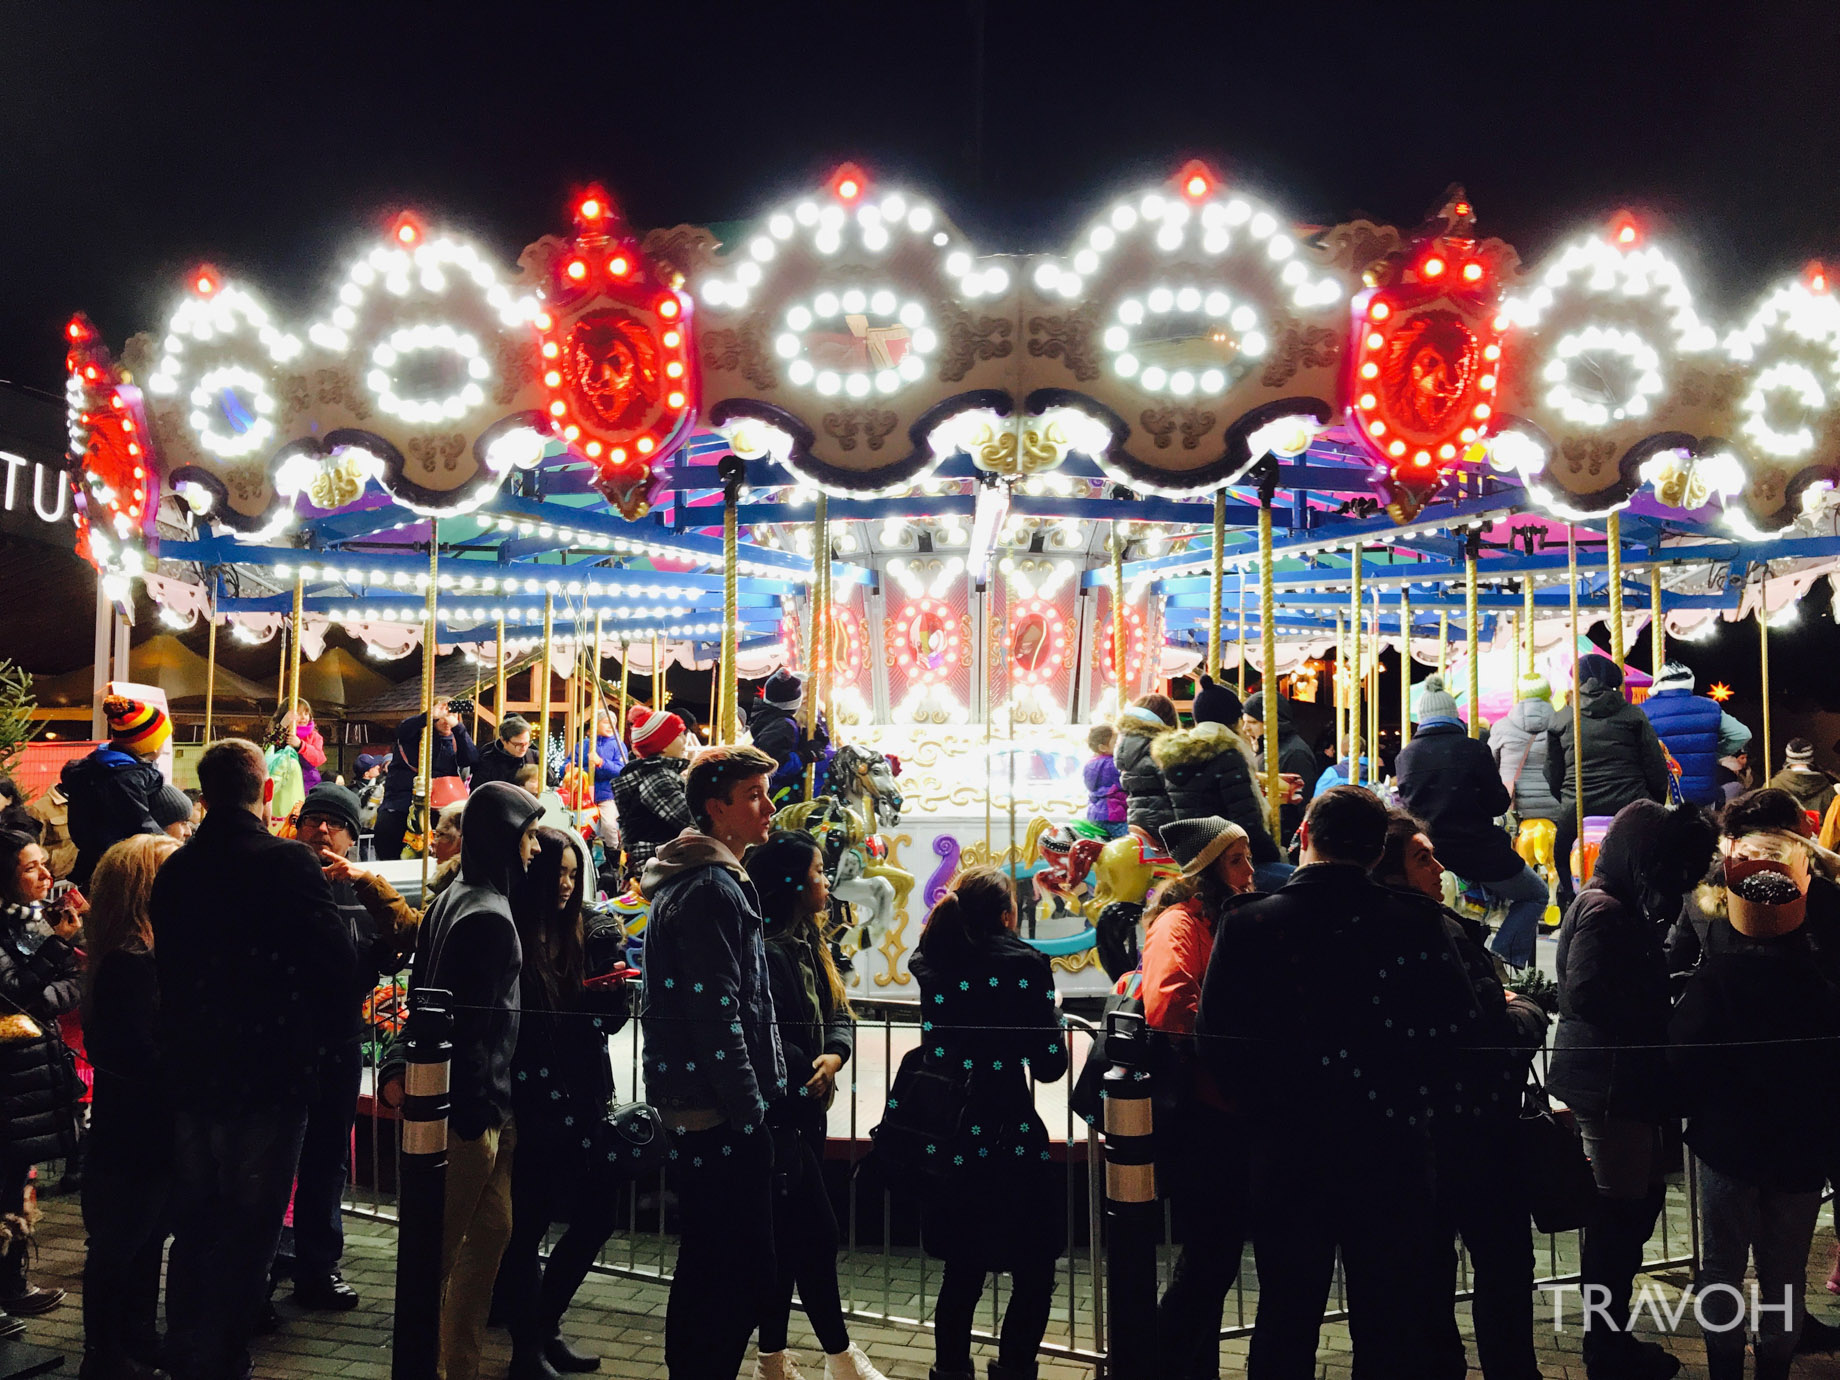 7th Annual Vancouver Christmas Market - A Very Merry German-Inspired Holiday Cheer